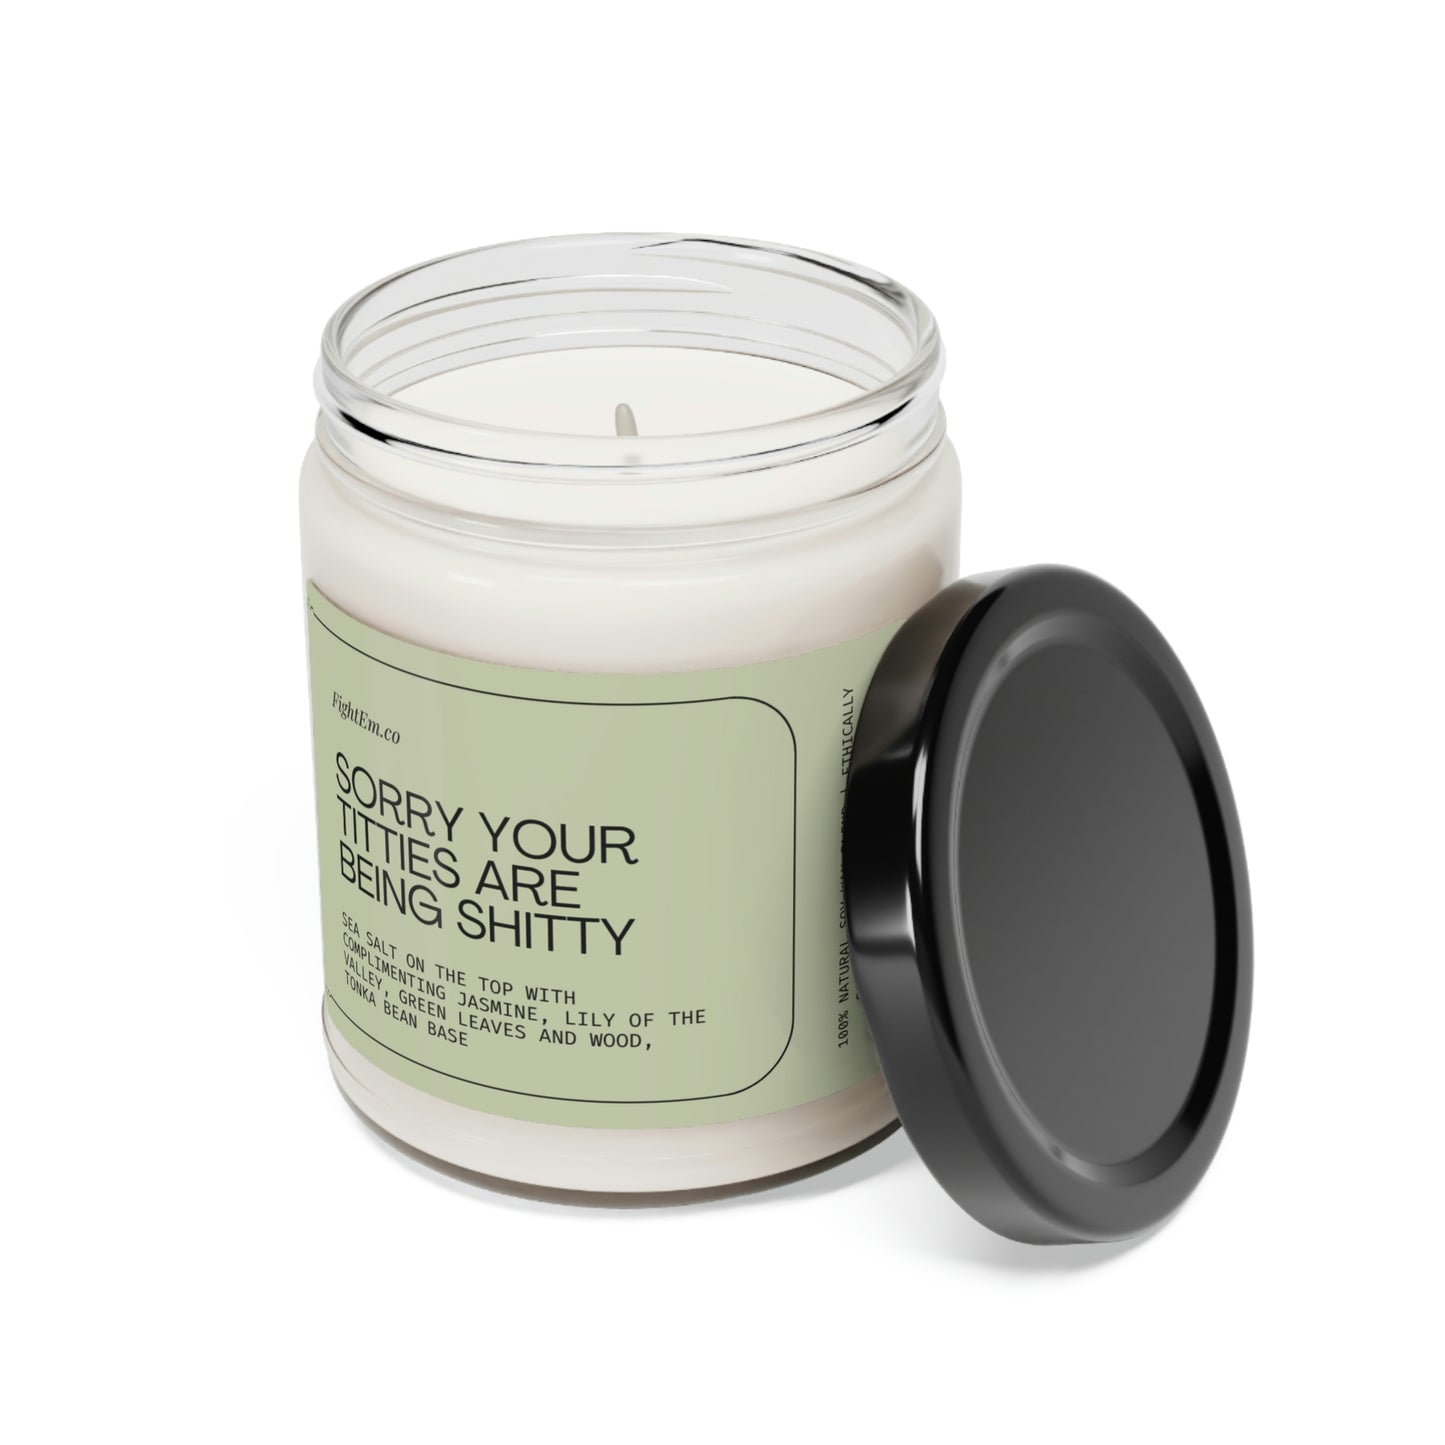 Sorry Your Titties Are Being Shitty Scented Soy Candle 9oz 100% Natural Soy Wax Blend